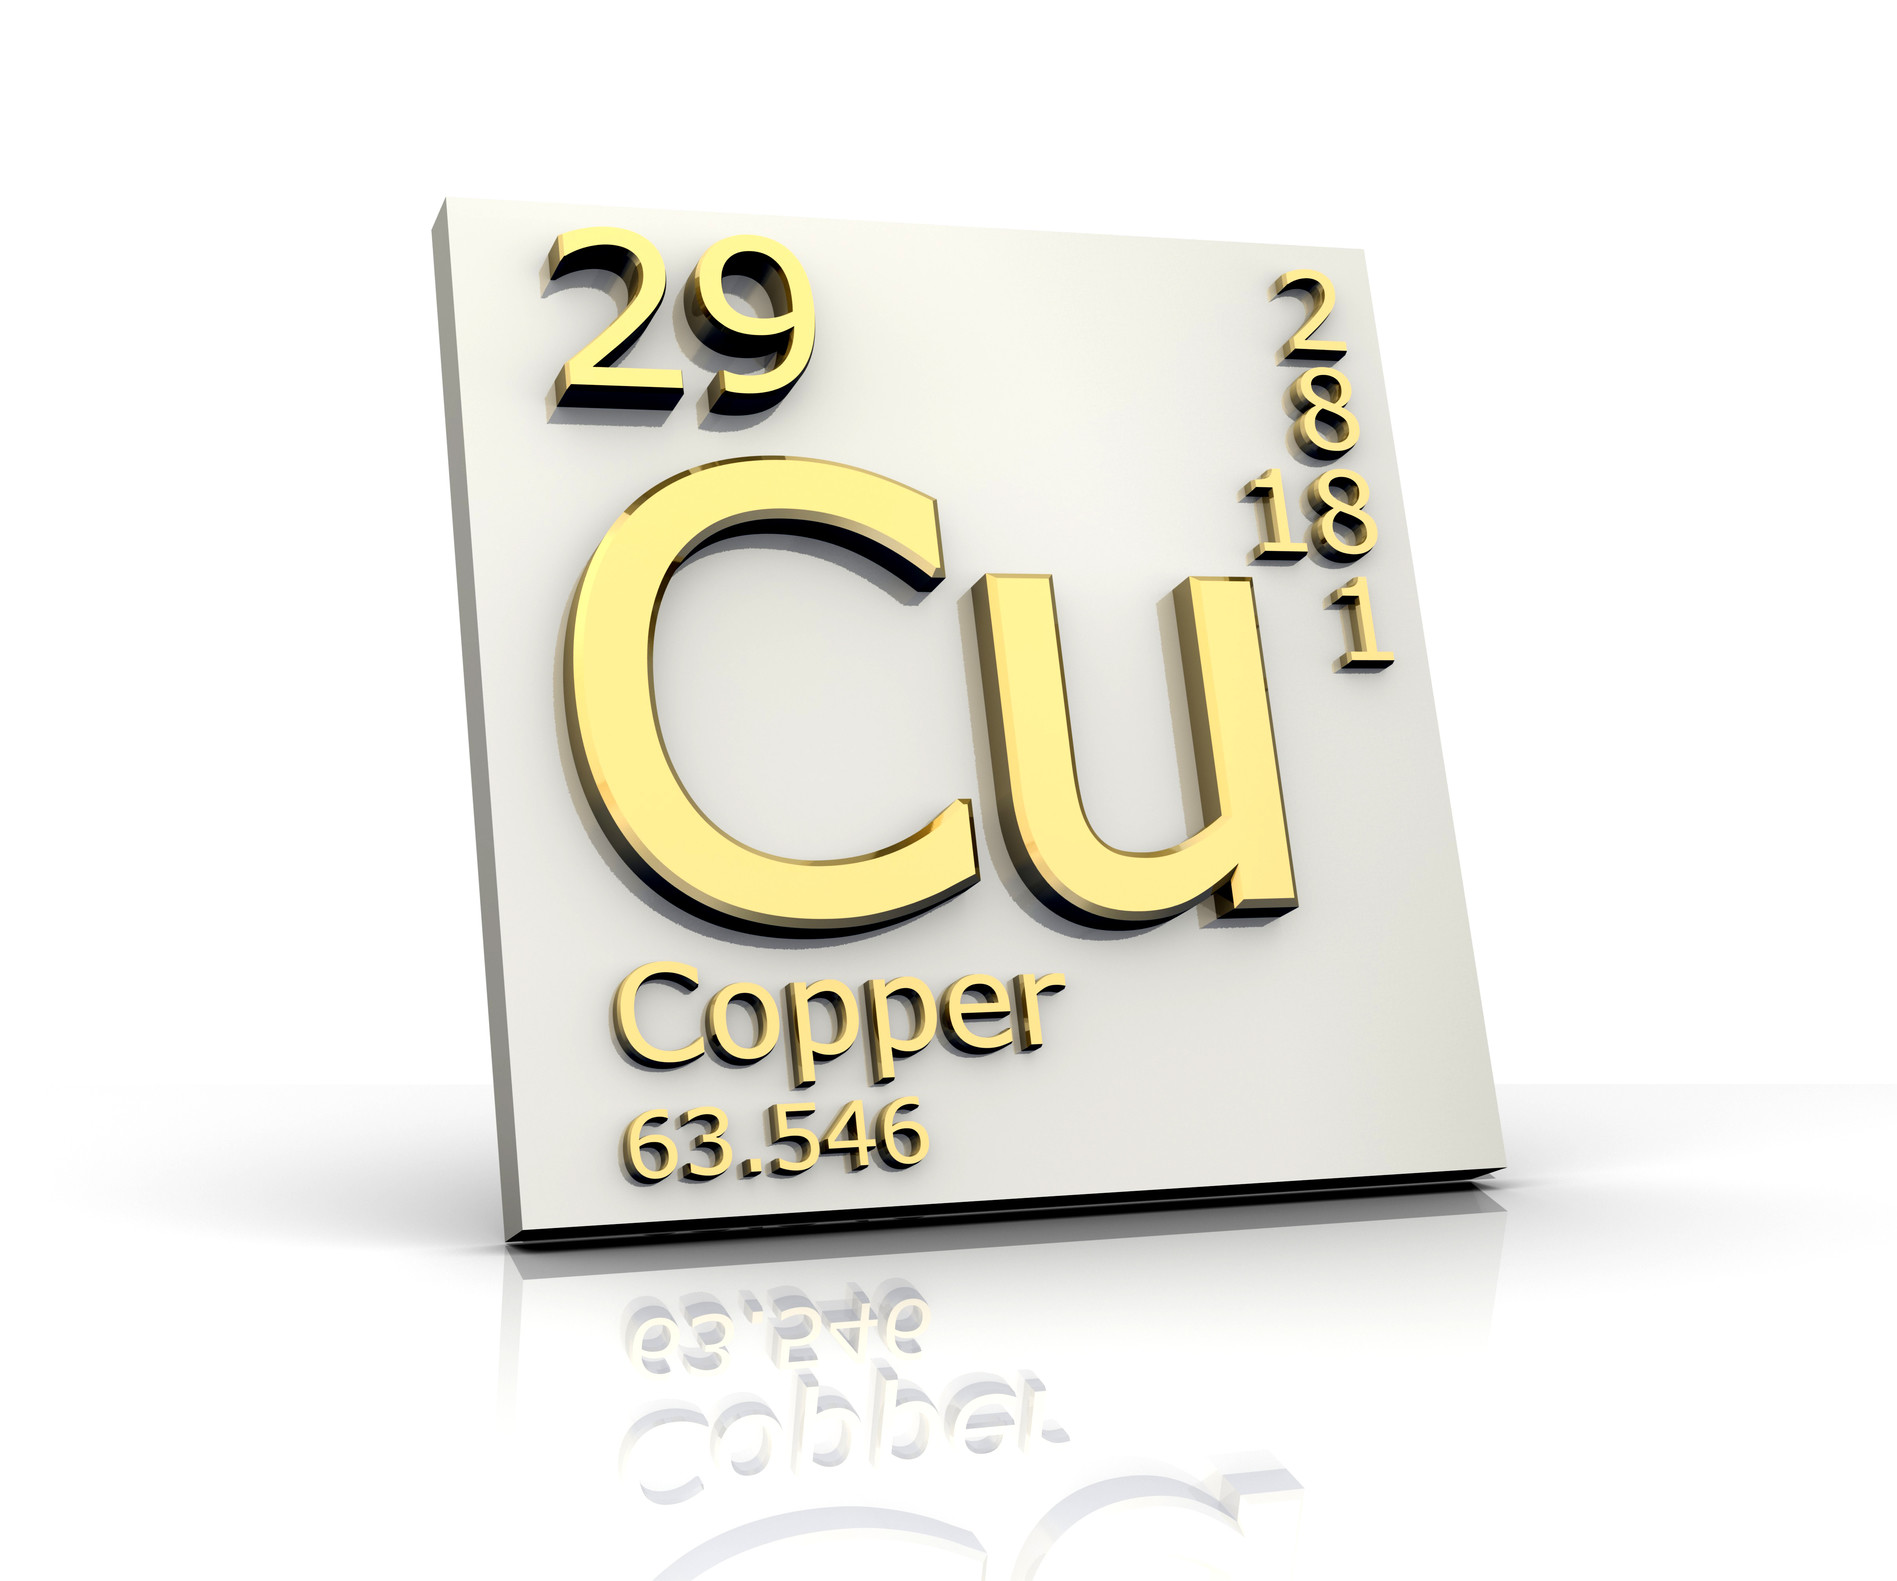 EU copper reduction plans officially approved